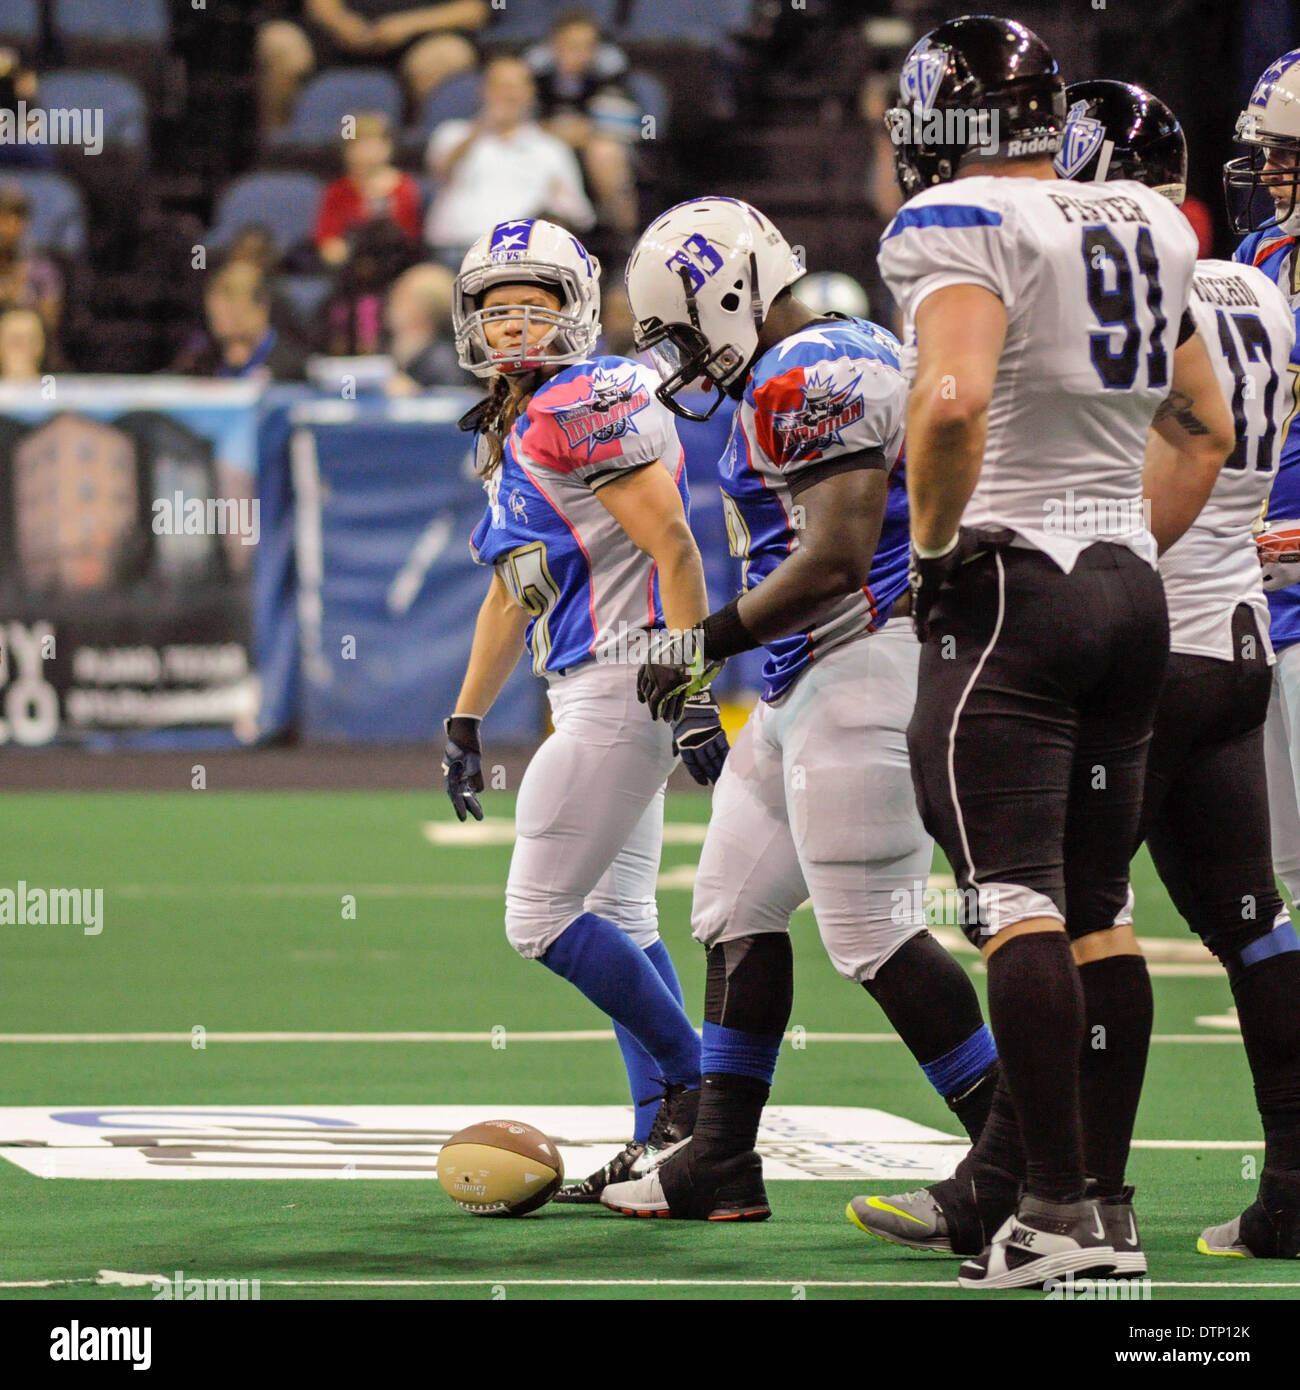 Allen, TX, USA. 21st Feb, 2014. After being tackled late in the fourth quarter, Texas Revolution running back Jennifer Welter (47) looks back at Cedar Rapids Titans' defensive lineman Ben Pister (91) during an Indoor Football League game at the Allen Event Center Friday, February 21, 2014, in Allen, Texas. The 5-foot-2-inch, 130 pound Welter is the first woman to play professional football at a position other than kicker, she made the final roster of the Texas Revolution of the Indoor Football League, as a running back. © csm/Alamy Live News Stock Photo